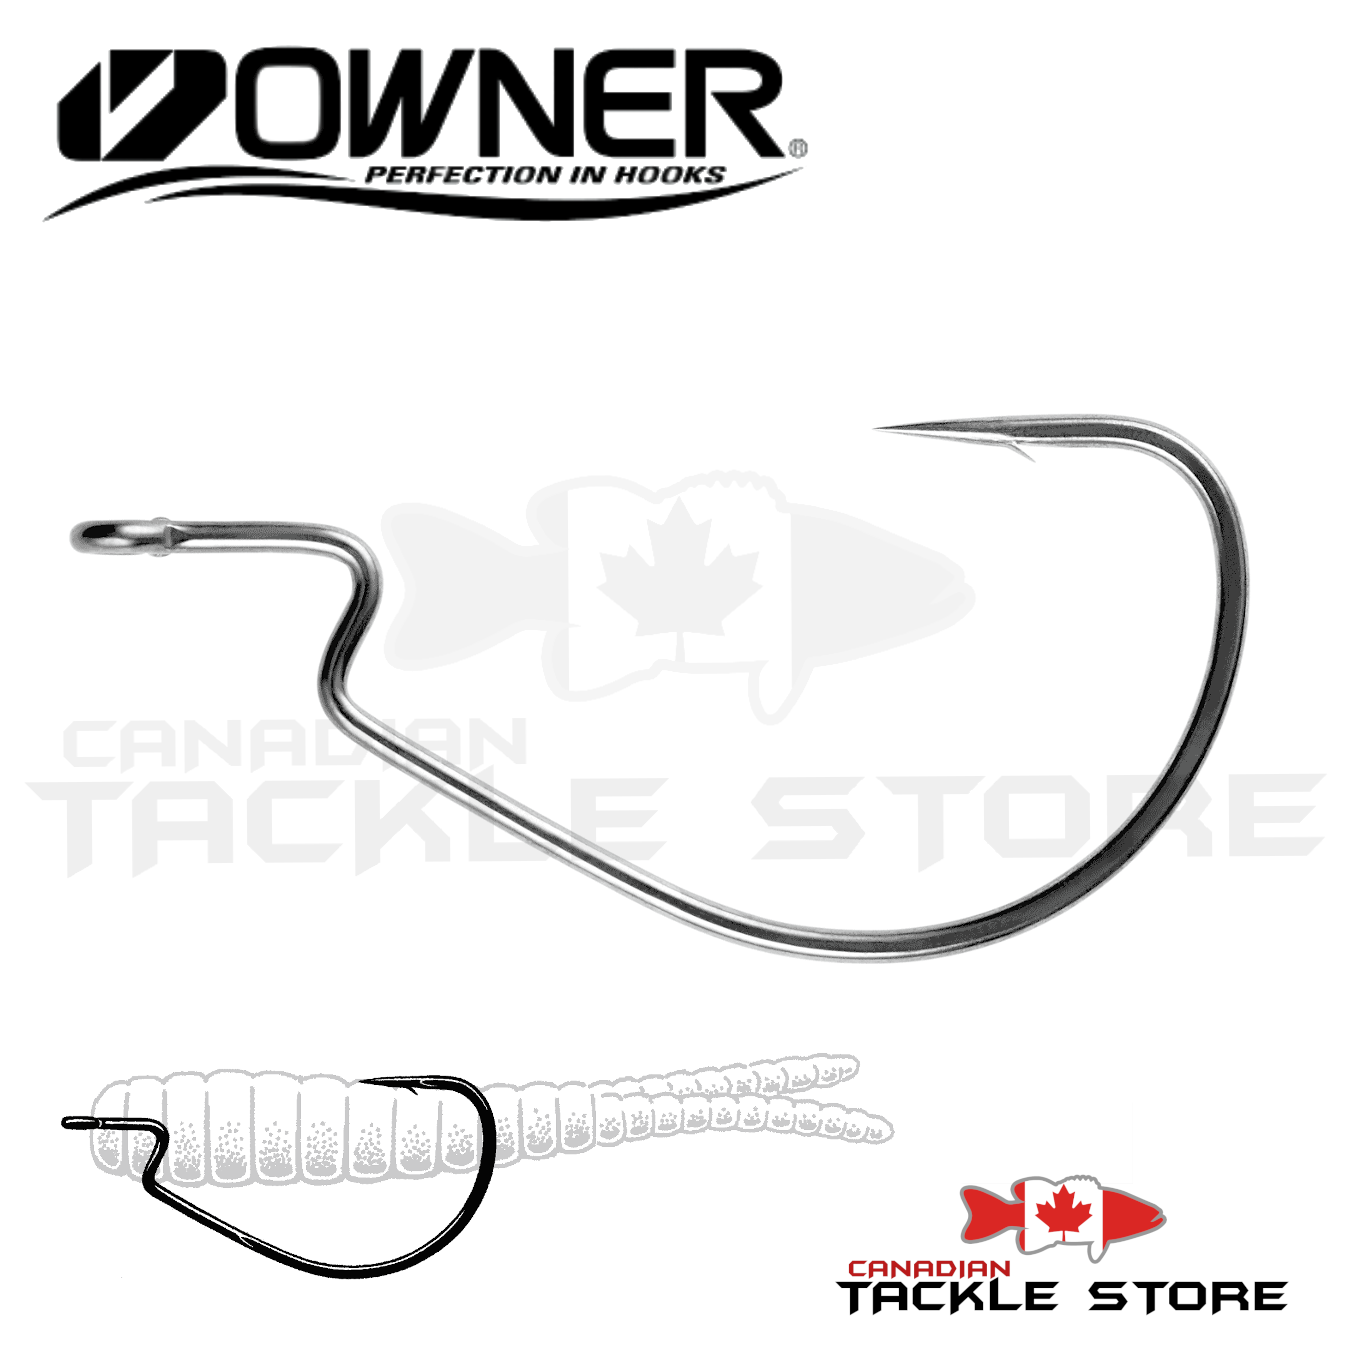 Weedless Hook – Canadian Tackle Store